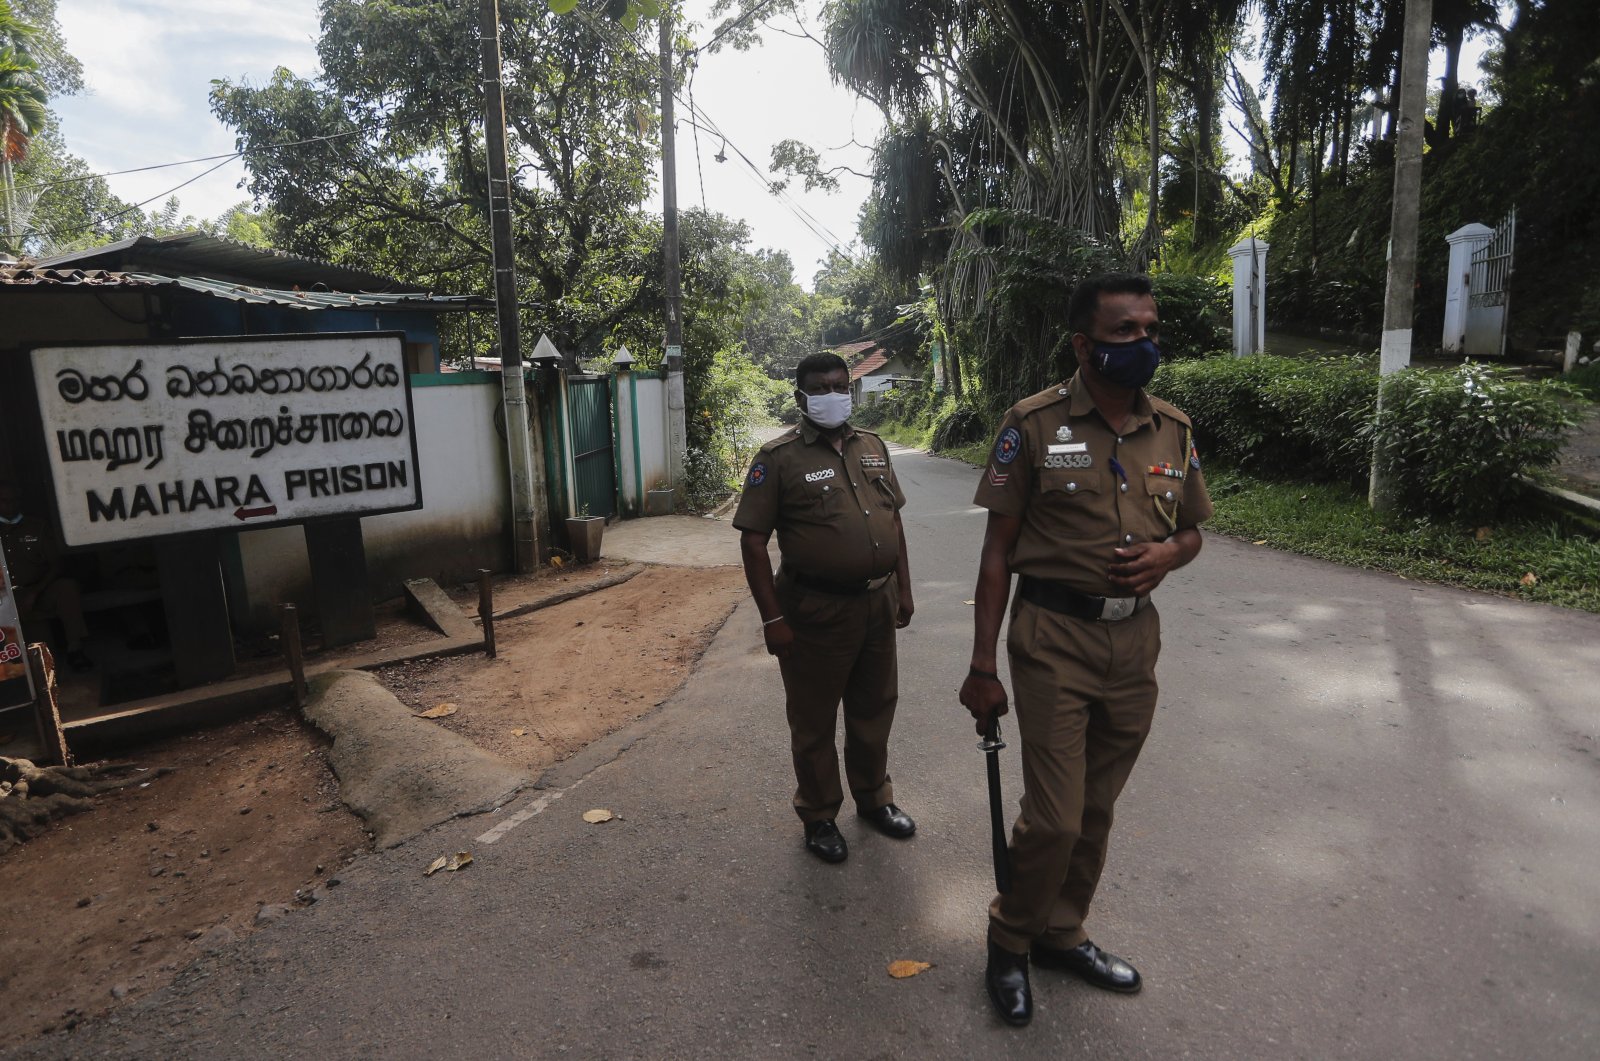 Sri Lankan police officers stand guard at the entrance to the Mahara prison complex following overnight unrest in Mahara, the outskirts of Colombo, Sri Lanka, Nov. 30, 2020. (AP Photo)